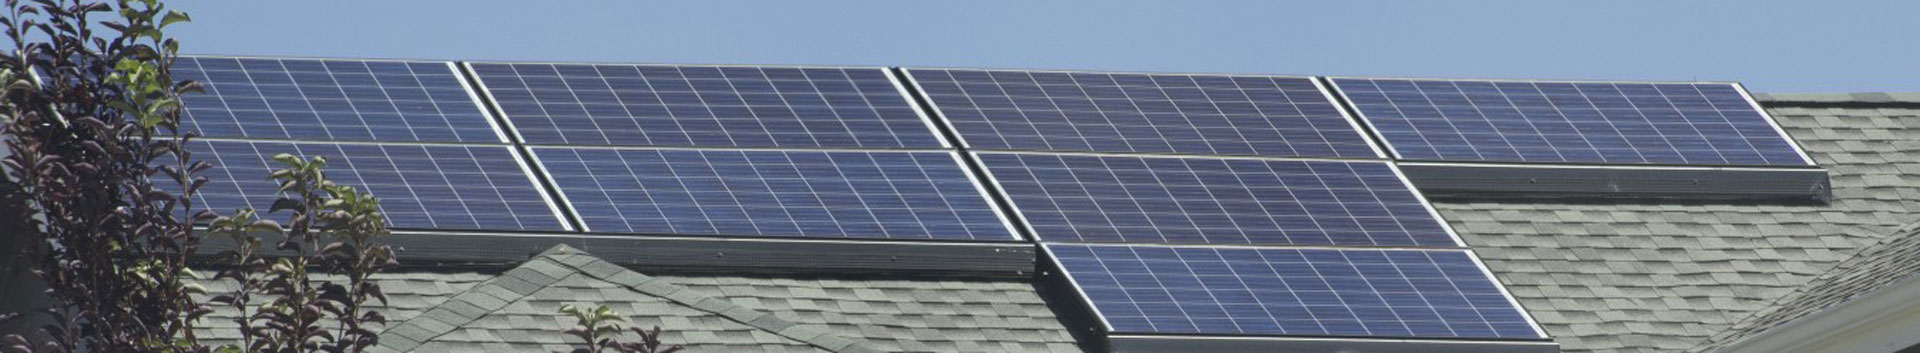 photo of solar panels on roof